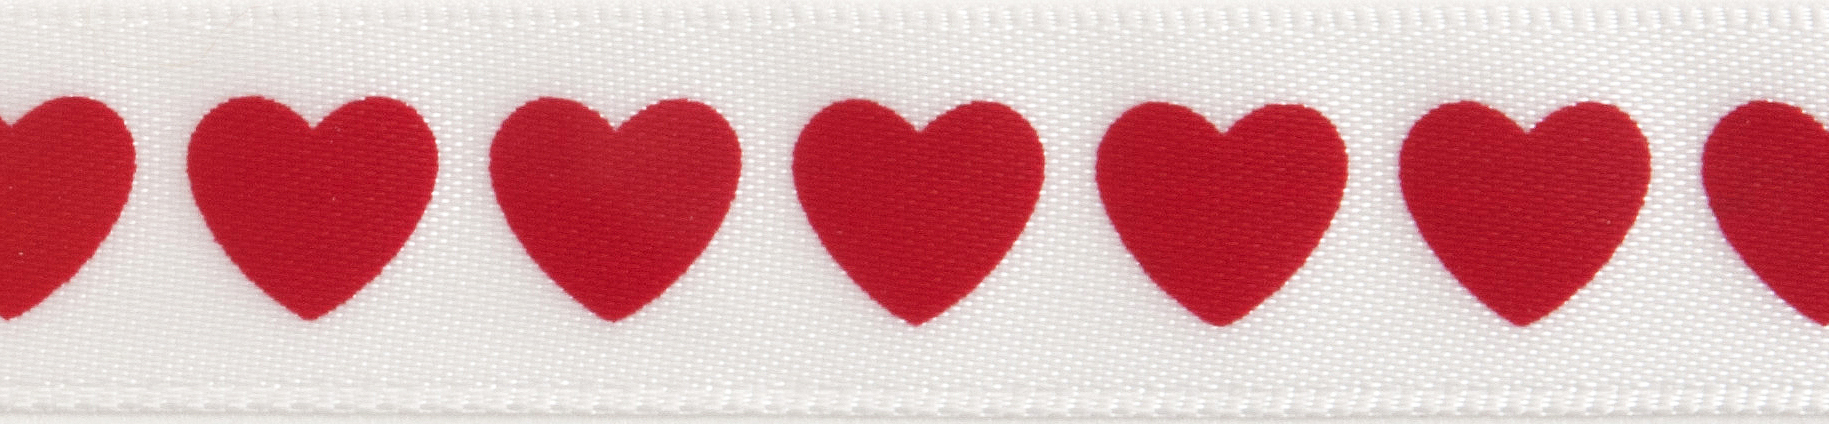 16mm x 4m Satin Heart Print - Red on White